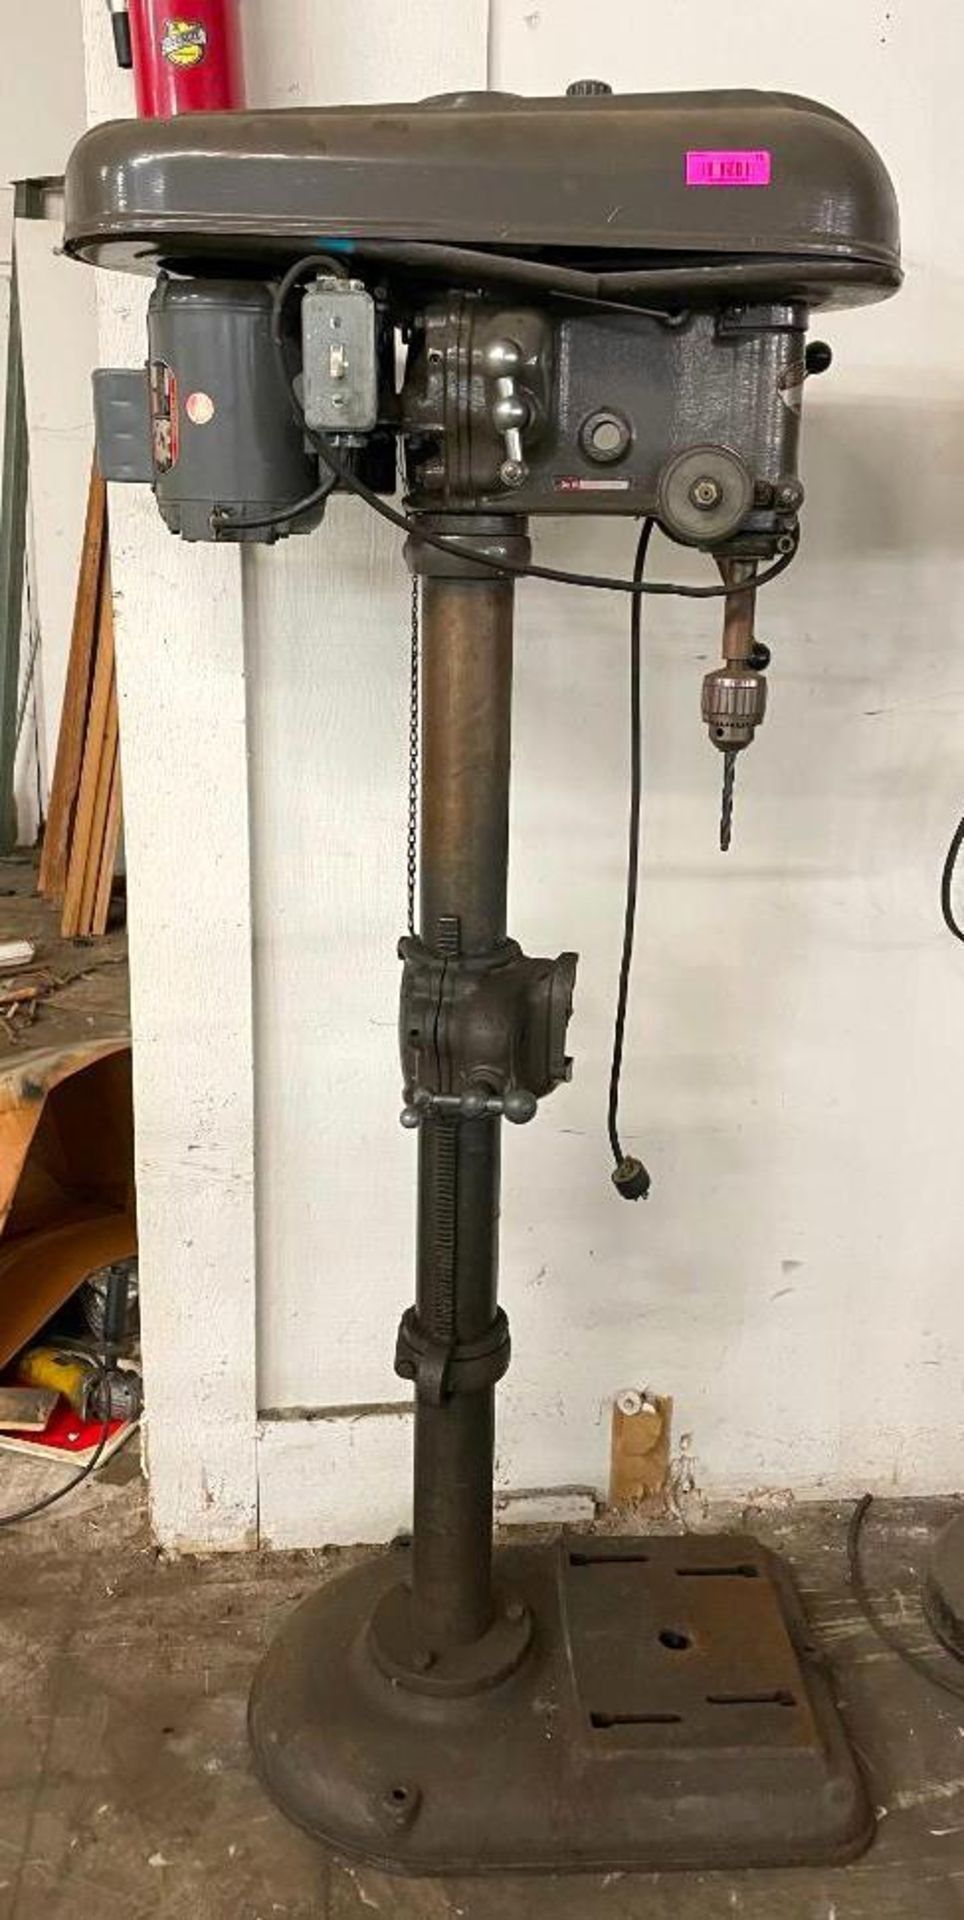 DESCRIPTION: DAYTON DRILL PRESS ( FOR PARTS, NOT IN WORKING CONDITION) QTY: 1